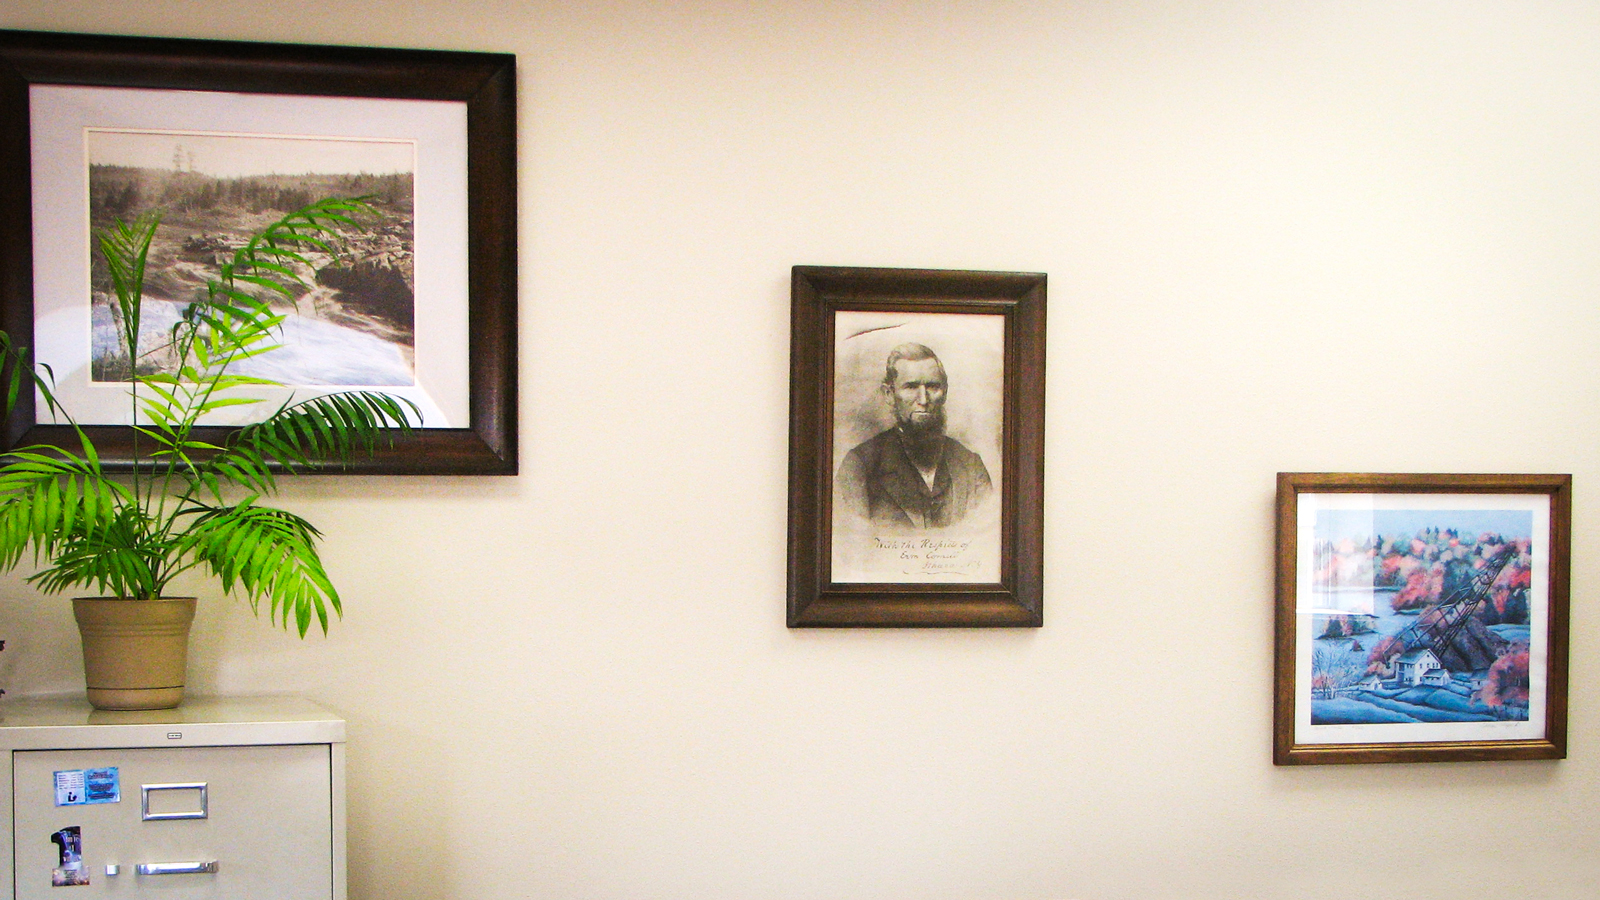 A signed lithograph of Ezra Cornell hangs on the wall of the city hall office in Cornell, Wisconsin